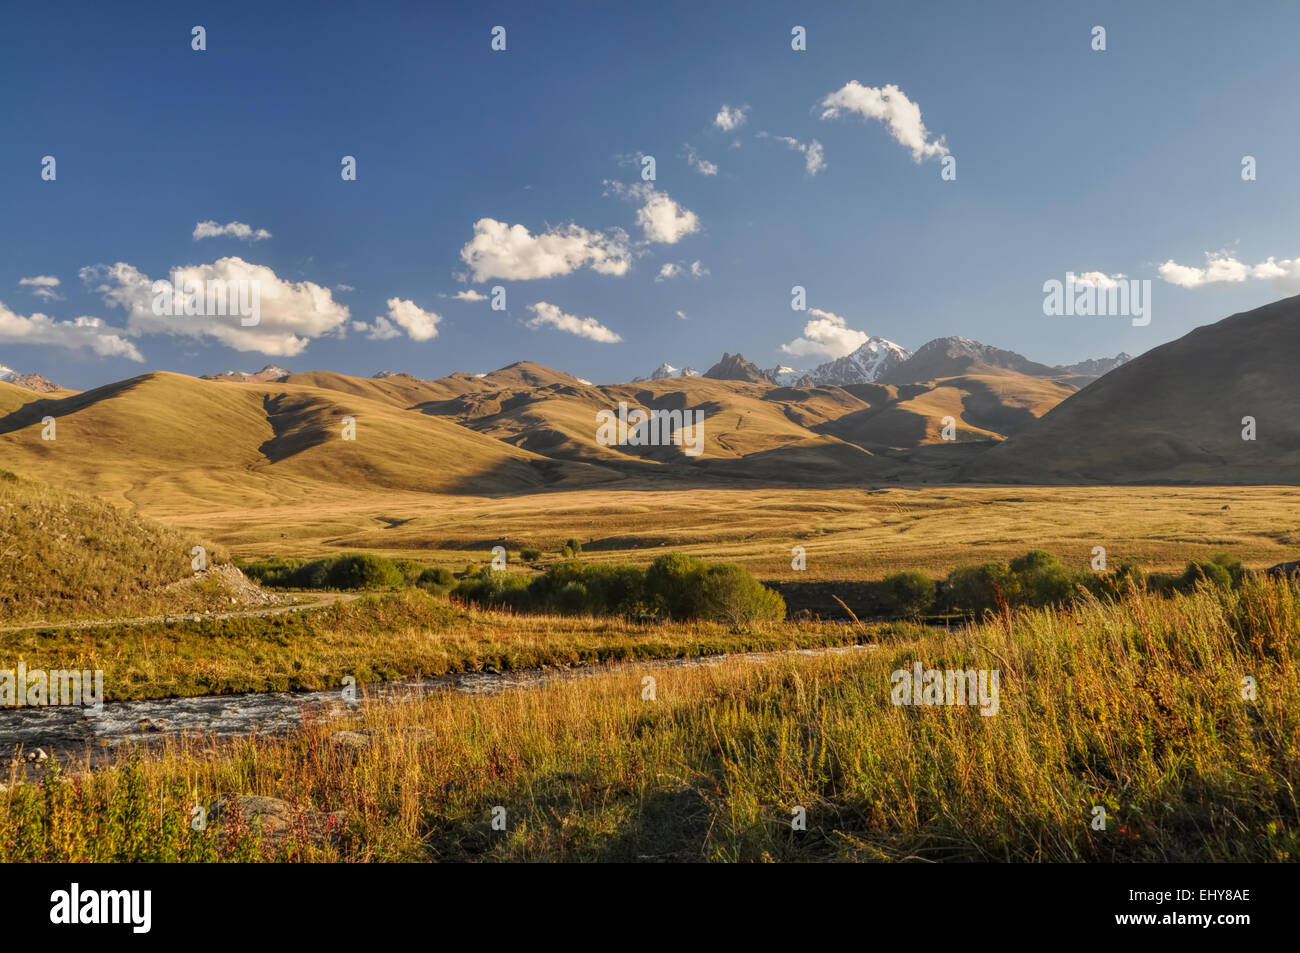 Scenic landscape of green grasslands in Kyrgyzstan Stock Photo